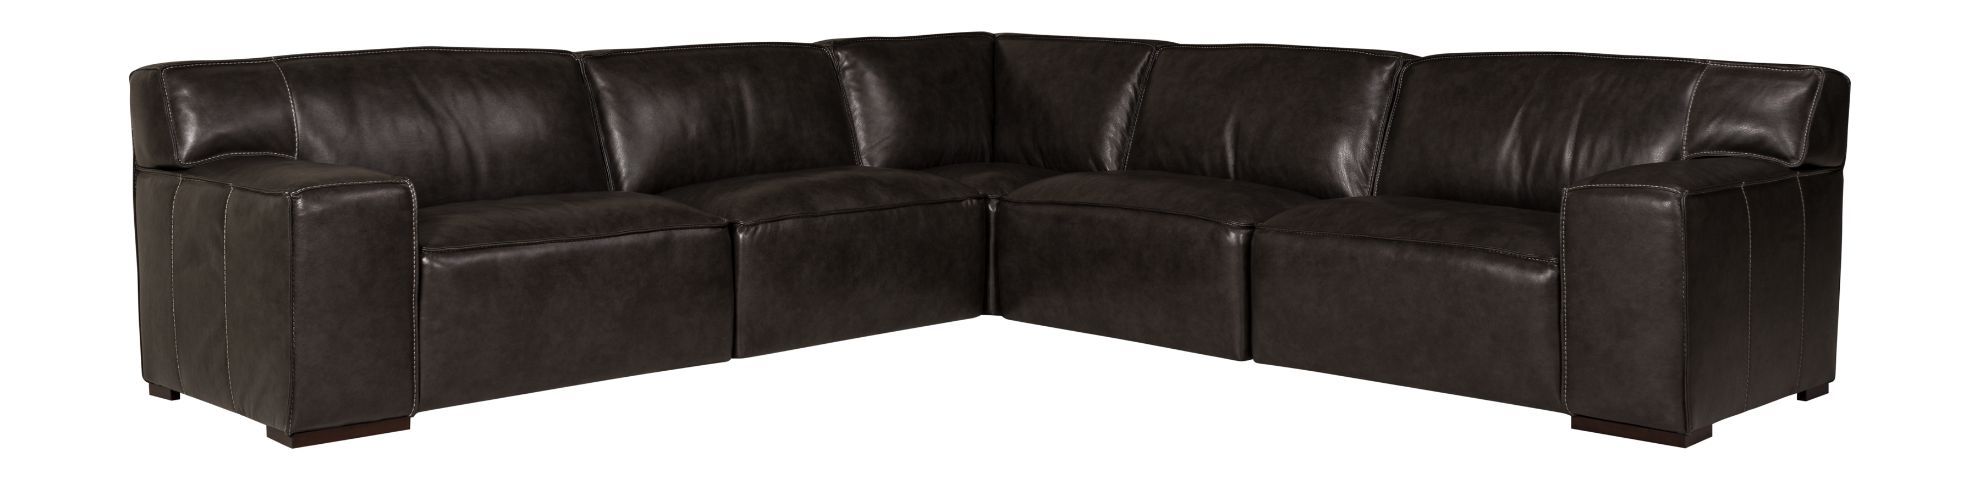 Stampede 5pc Sectional